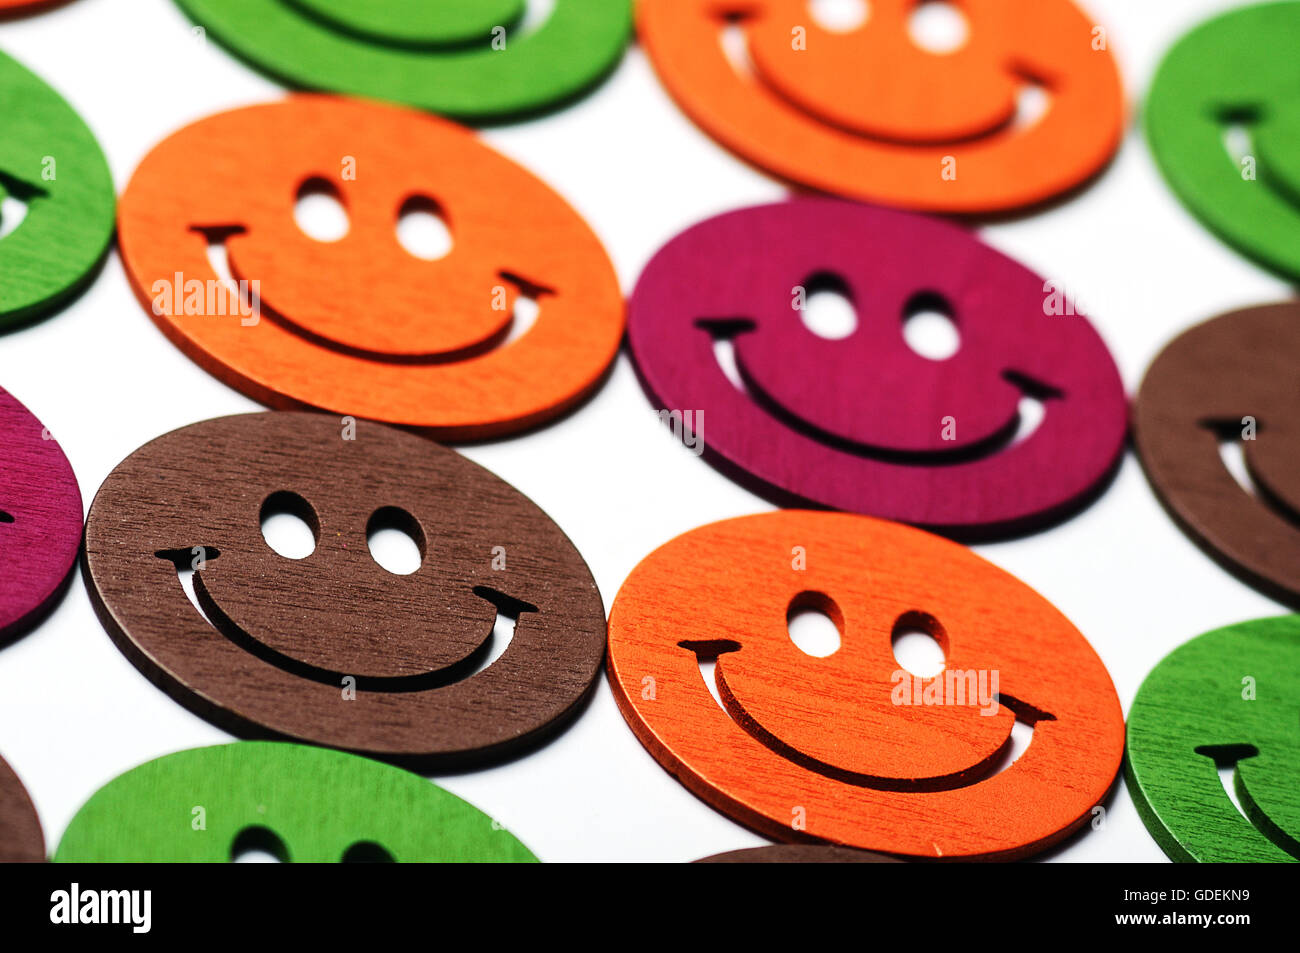 smiling wooden multi colored emoticons in row Stock Photo